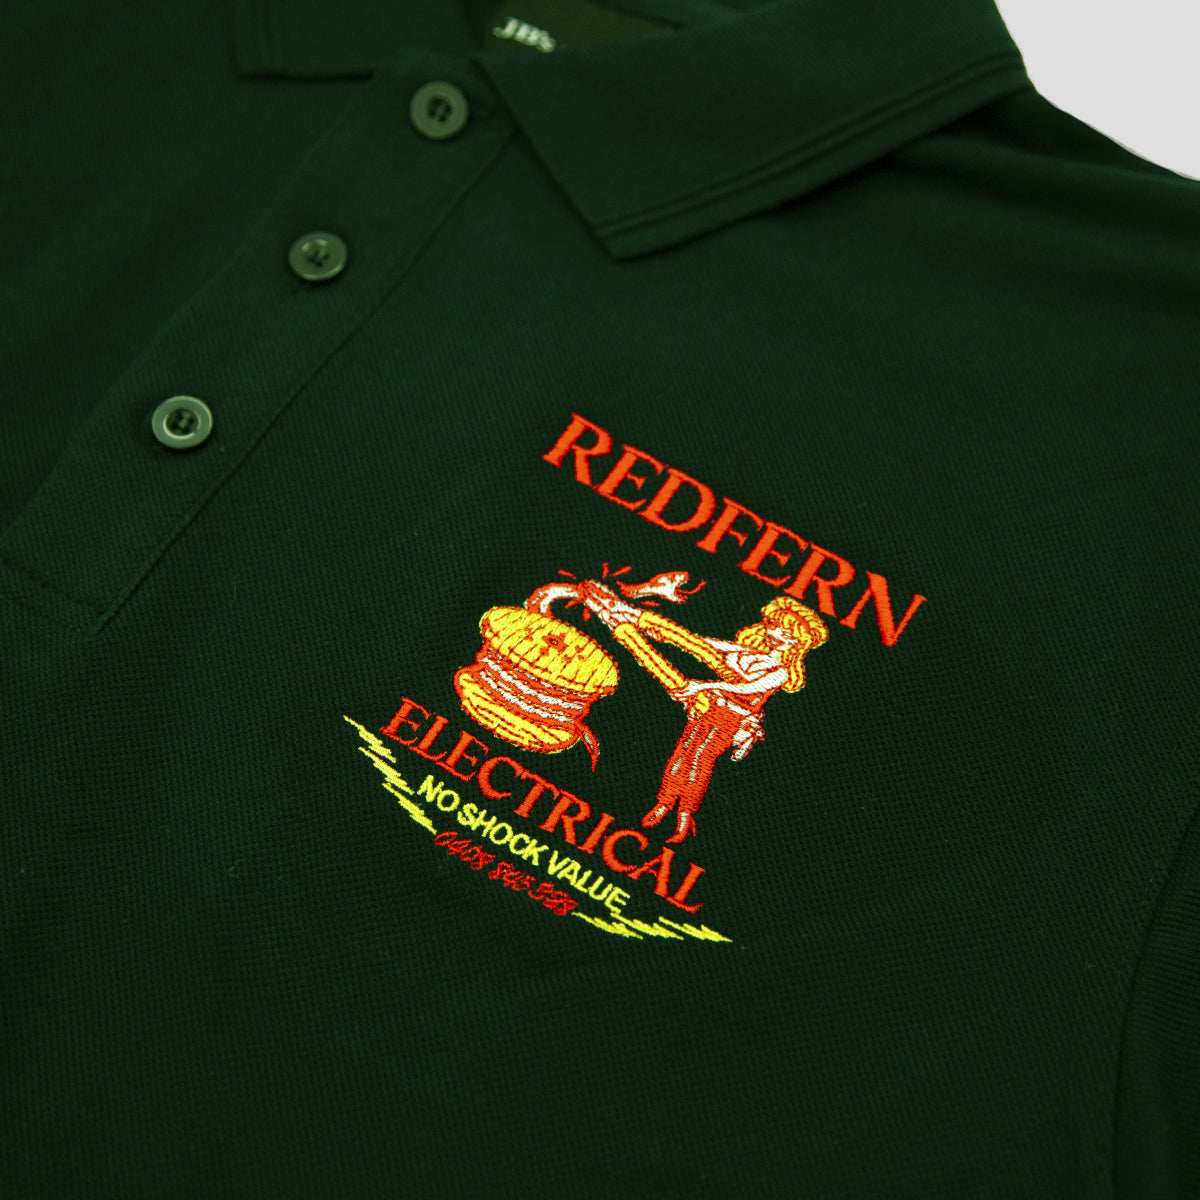 REDFERN ELECTRICAL "NO SHOCK VALUE" POLO FOREST GREEN